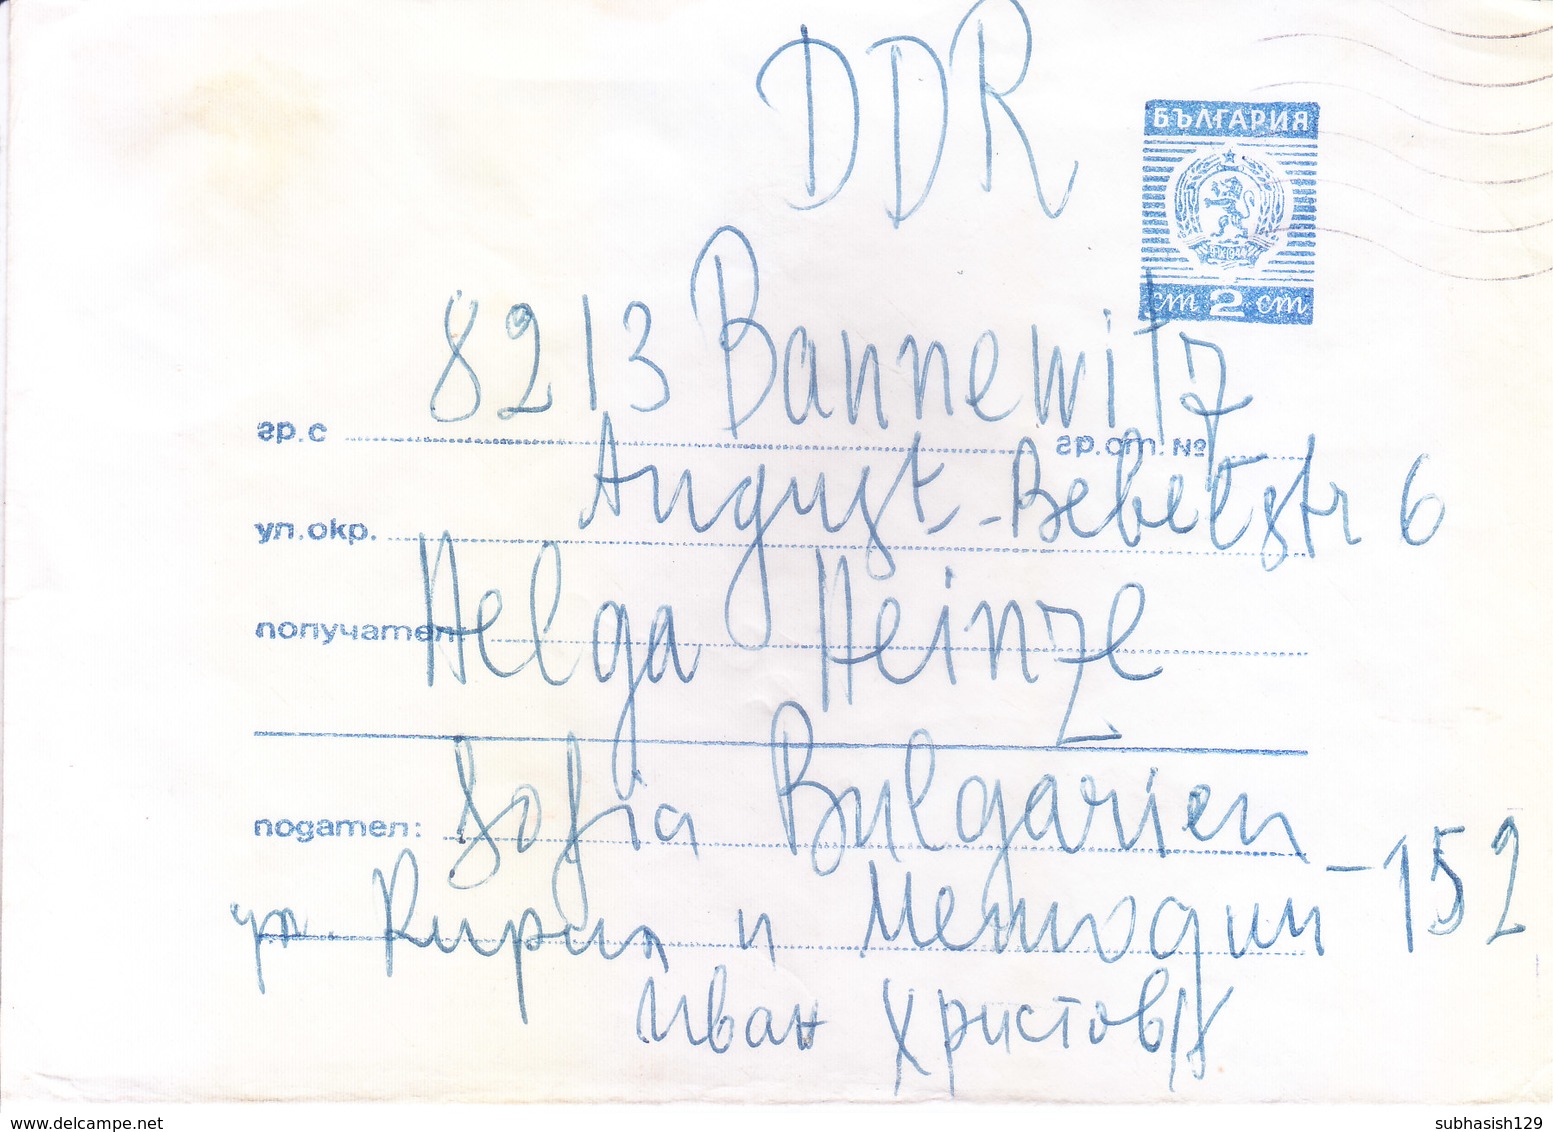 BULGARIA : OFFICIAL PRE STAMPED POSTAL STATIONERY AEROGRAMME : USED FOR GERMANY - Aerogramme